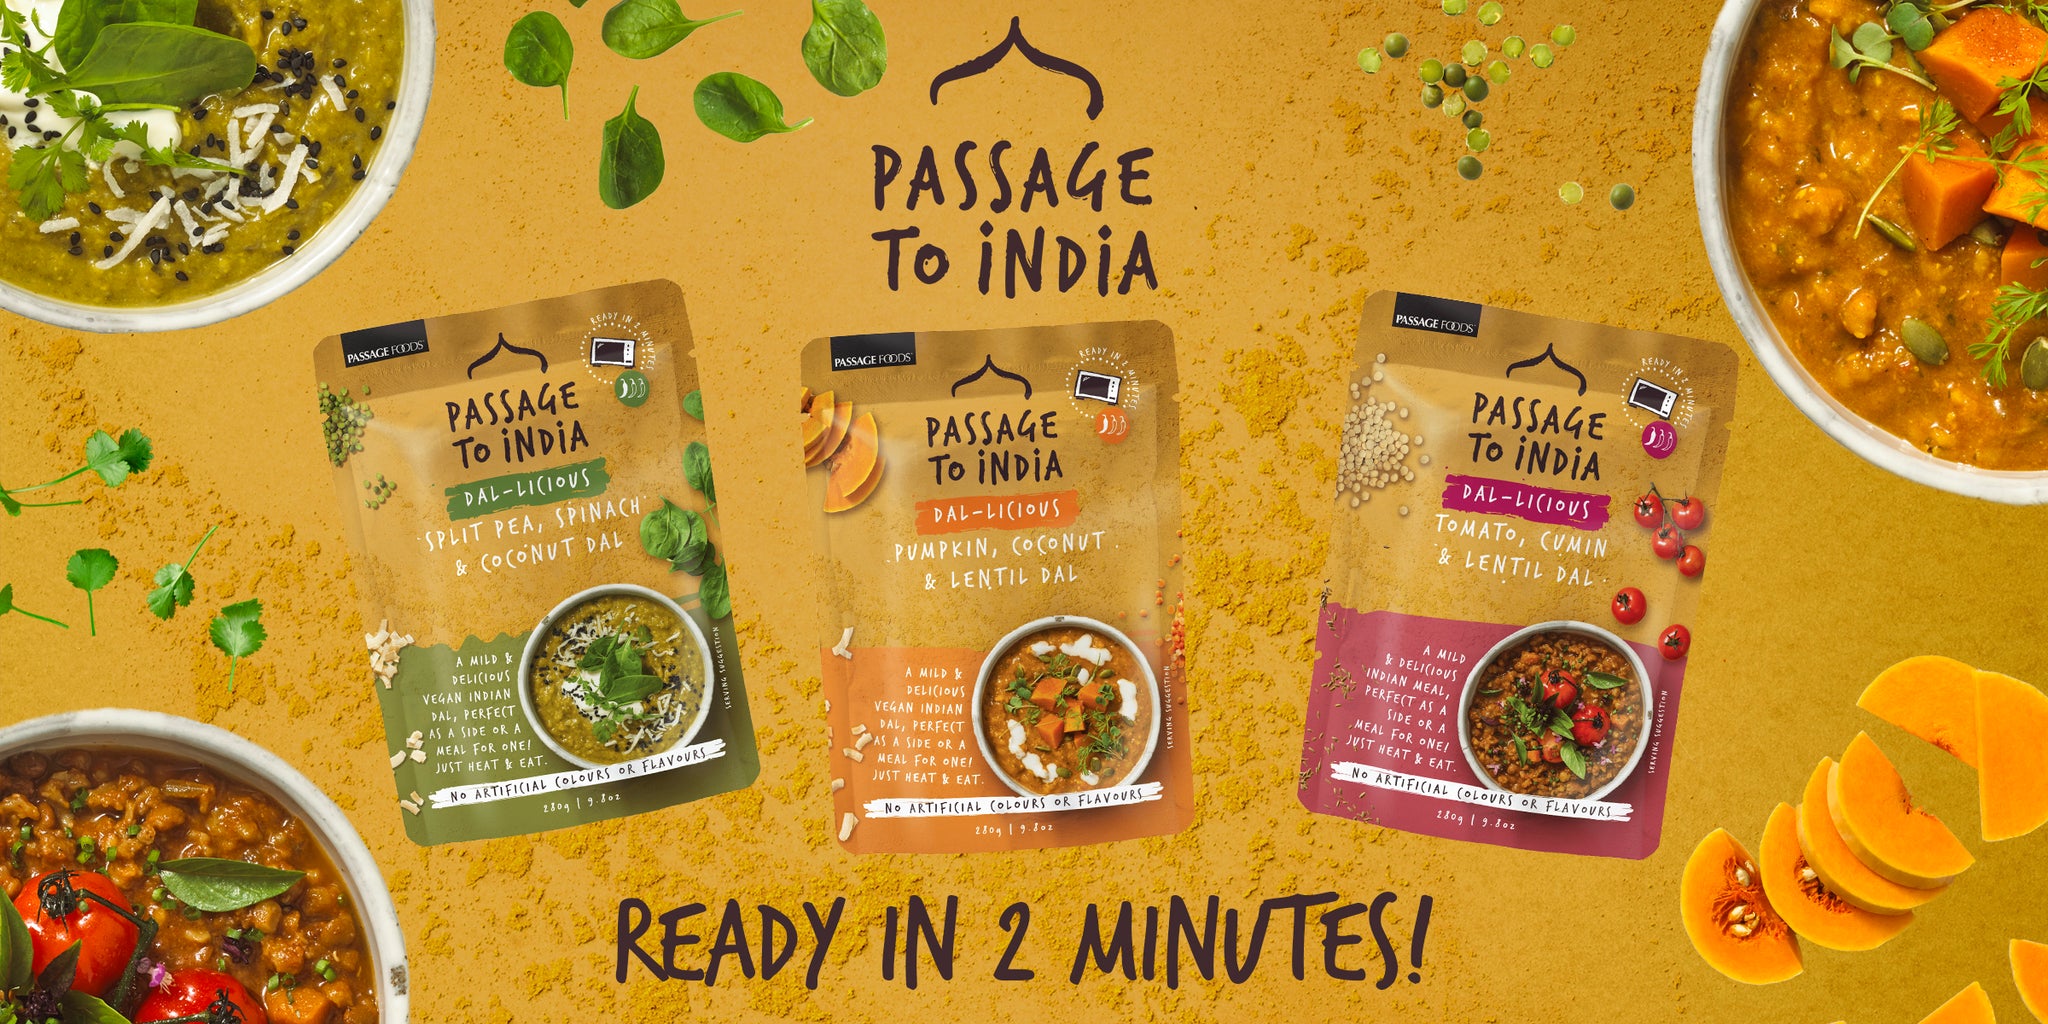 Dal-licious Ready to Eat Meals NEW to Aus Pantry! – AUS PANTRY